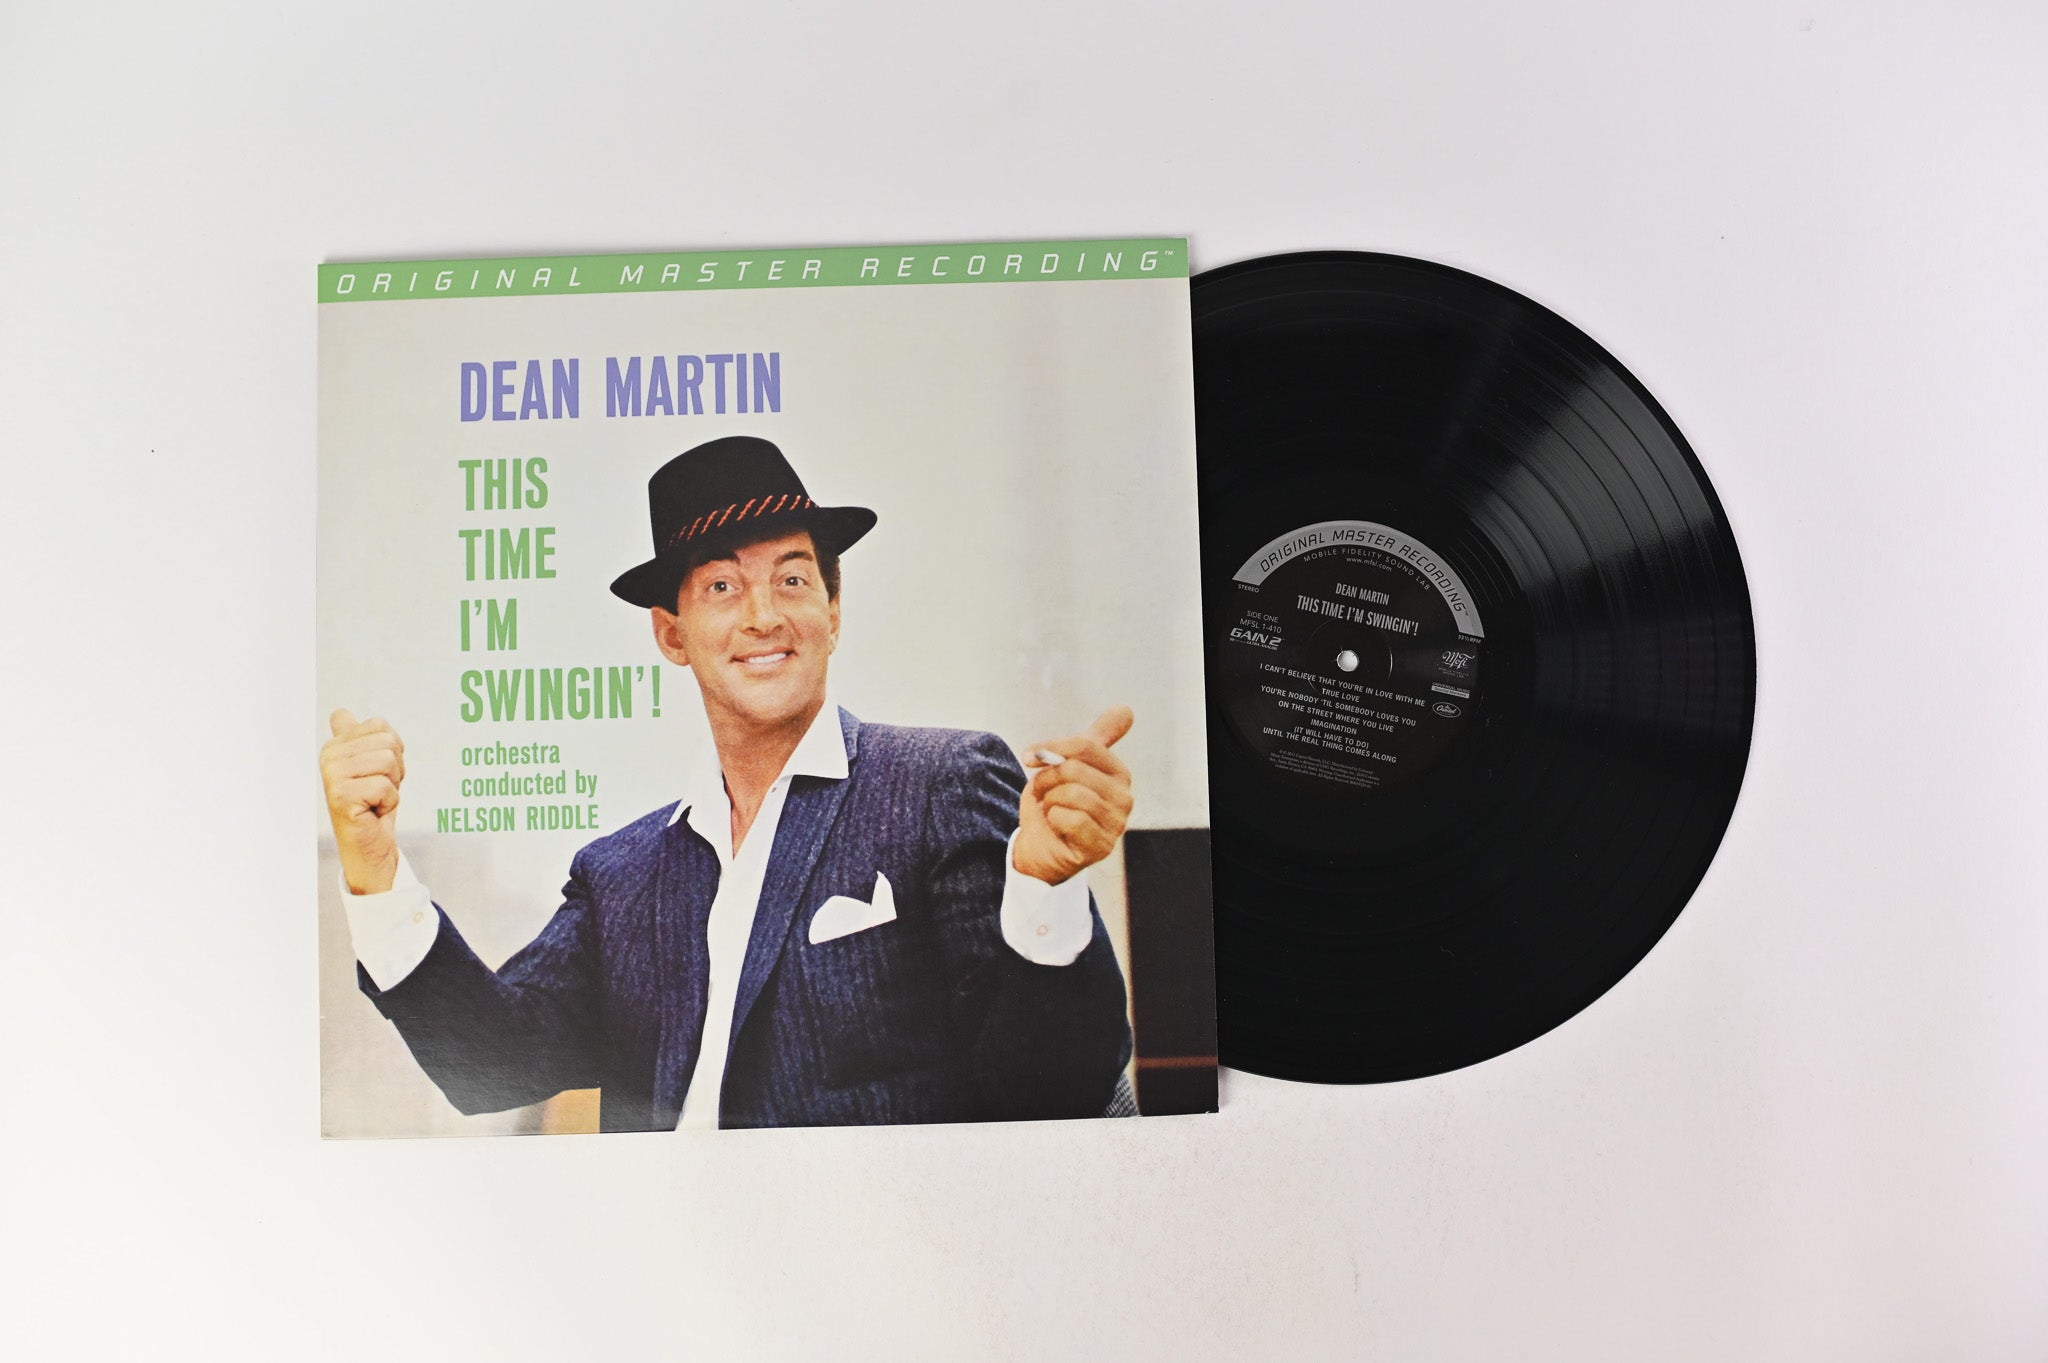 Dean Martin - This Time I'm Swingin' on Mobile Fidelity Sound Lab